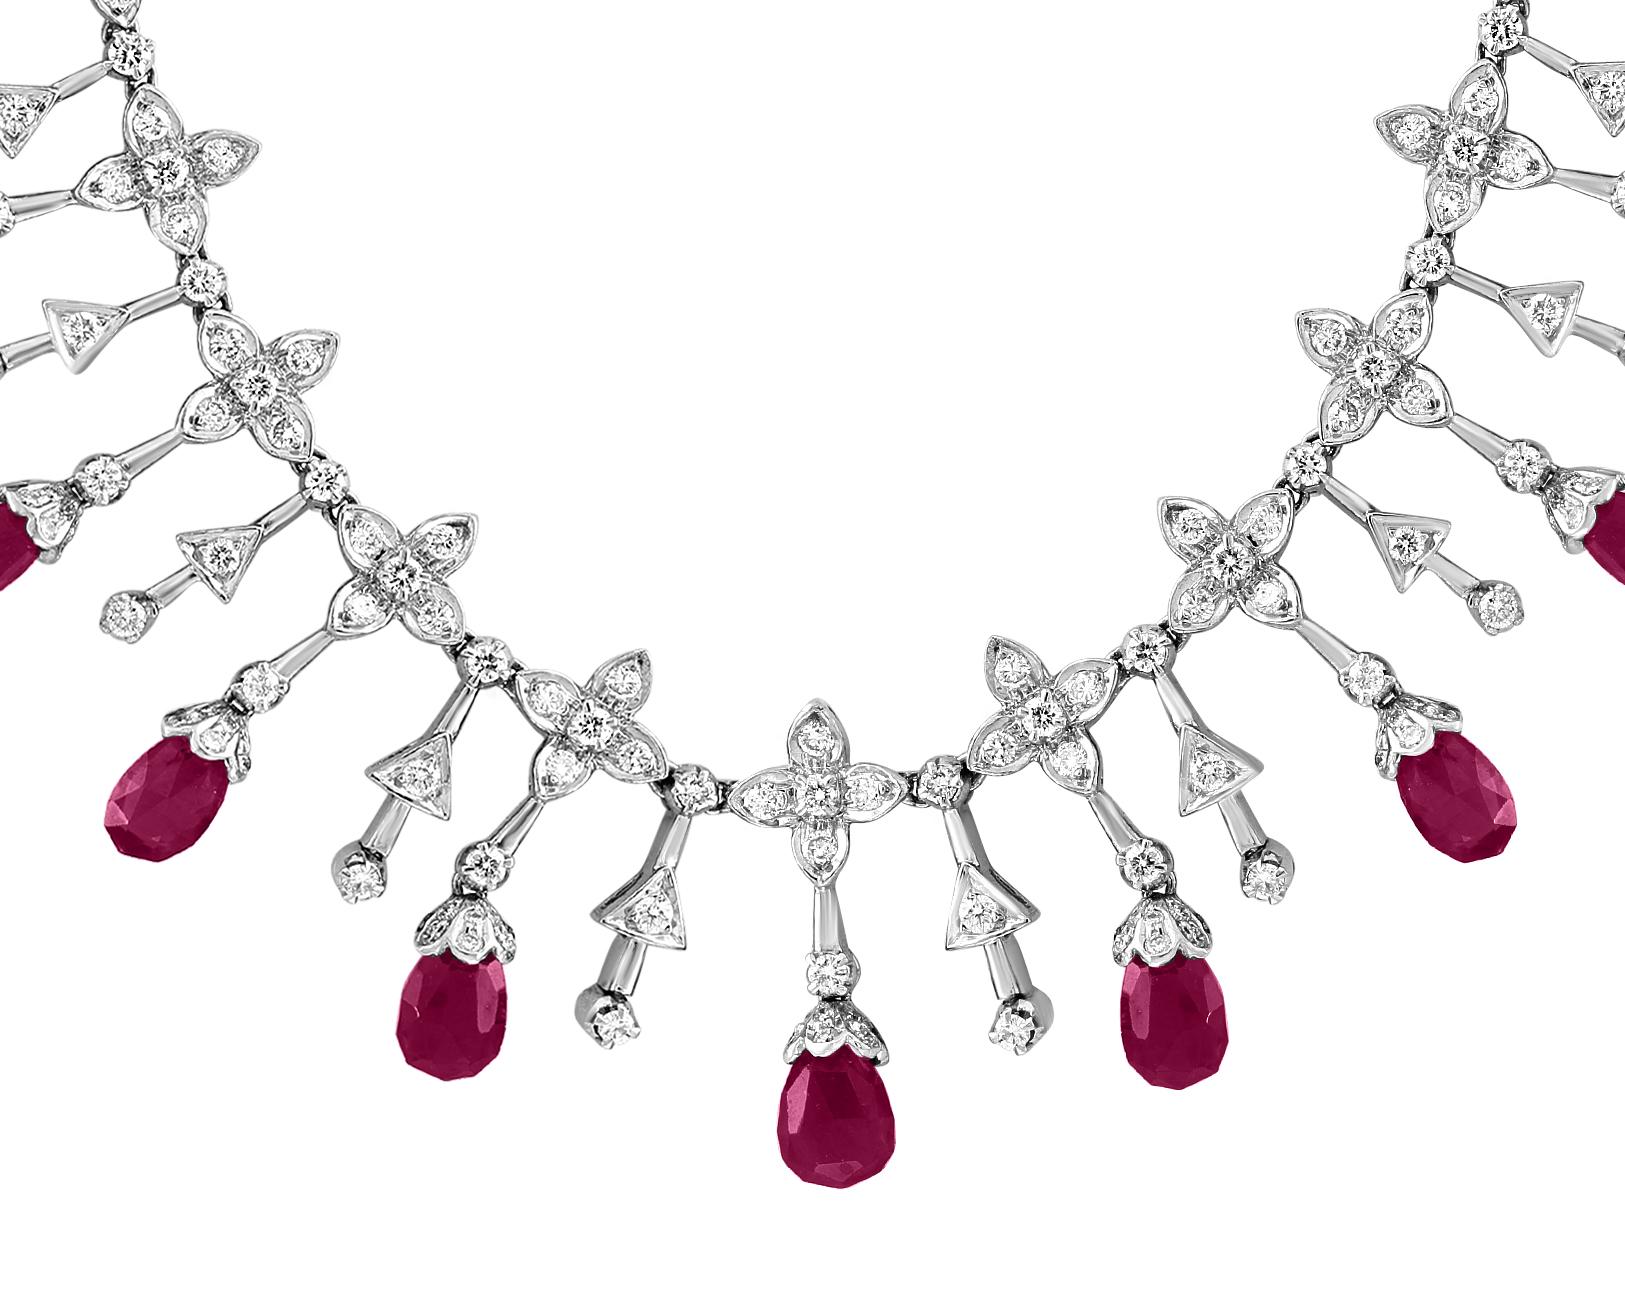 This exquisite Estate Necklace showcases a collection of 13 Natural Ruby Briolettes, totaling approximately 18 carats. The stunning rubies are elegantly enhanced by approximately 8 carats of brilliant-cut diamonds, creating a captivating contrast.